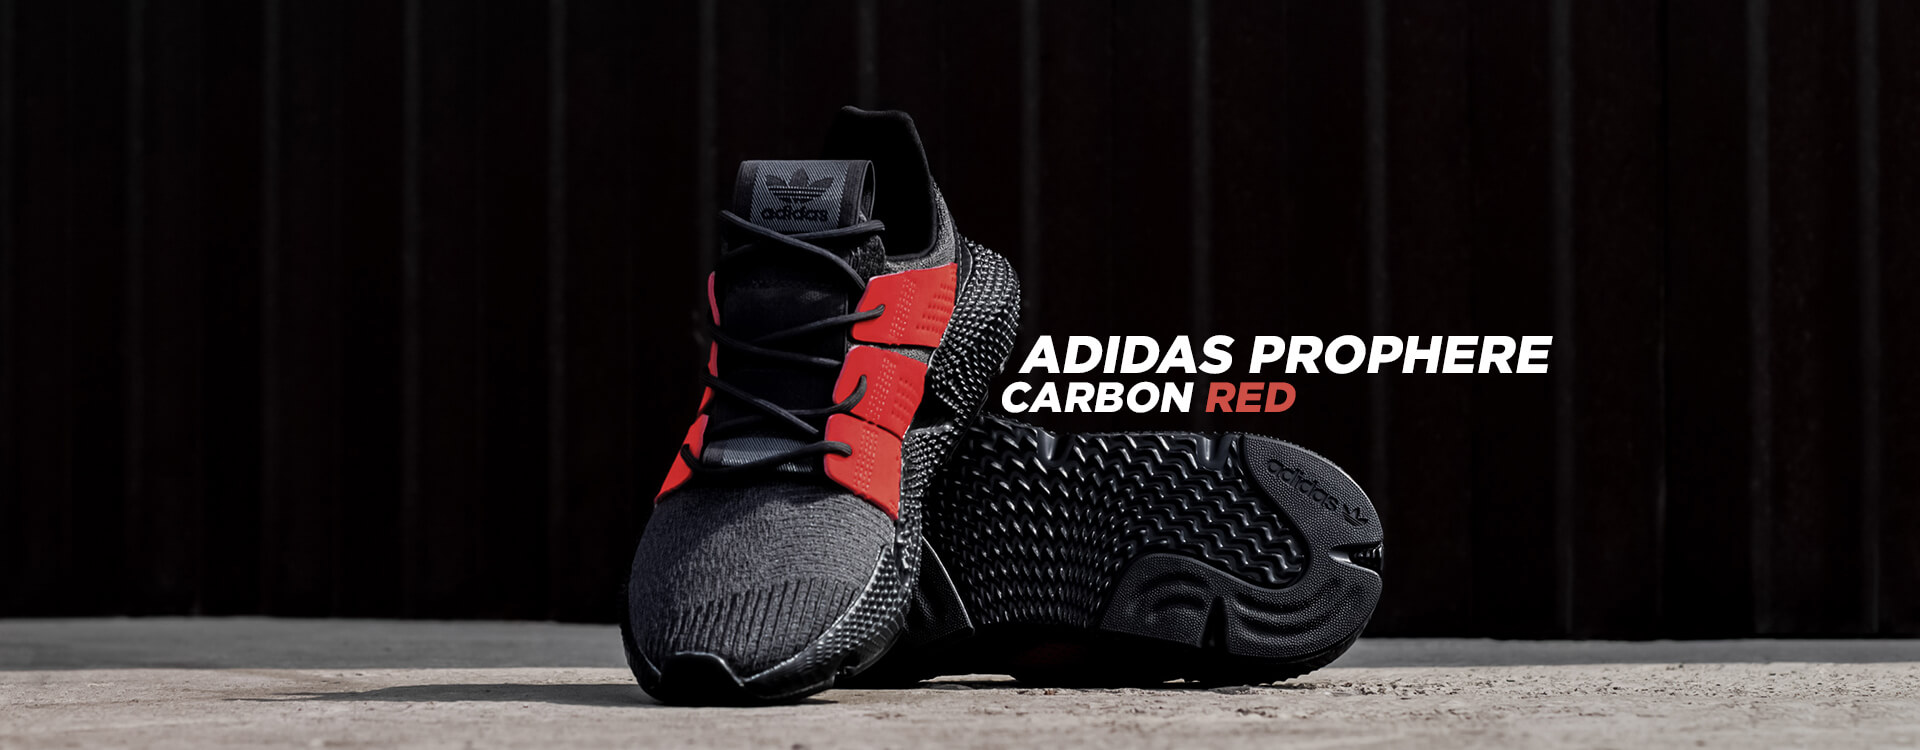 Adidas Prophere Carbon Red